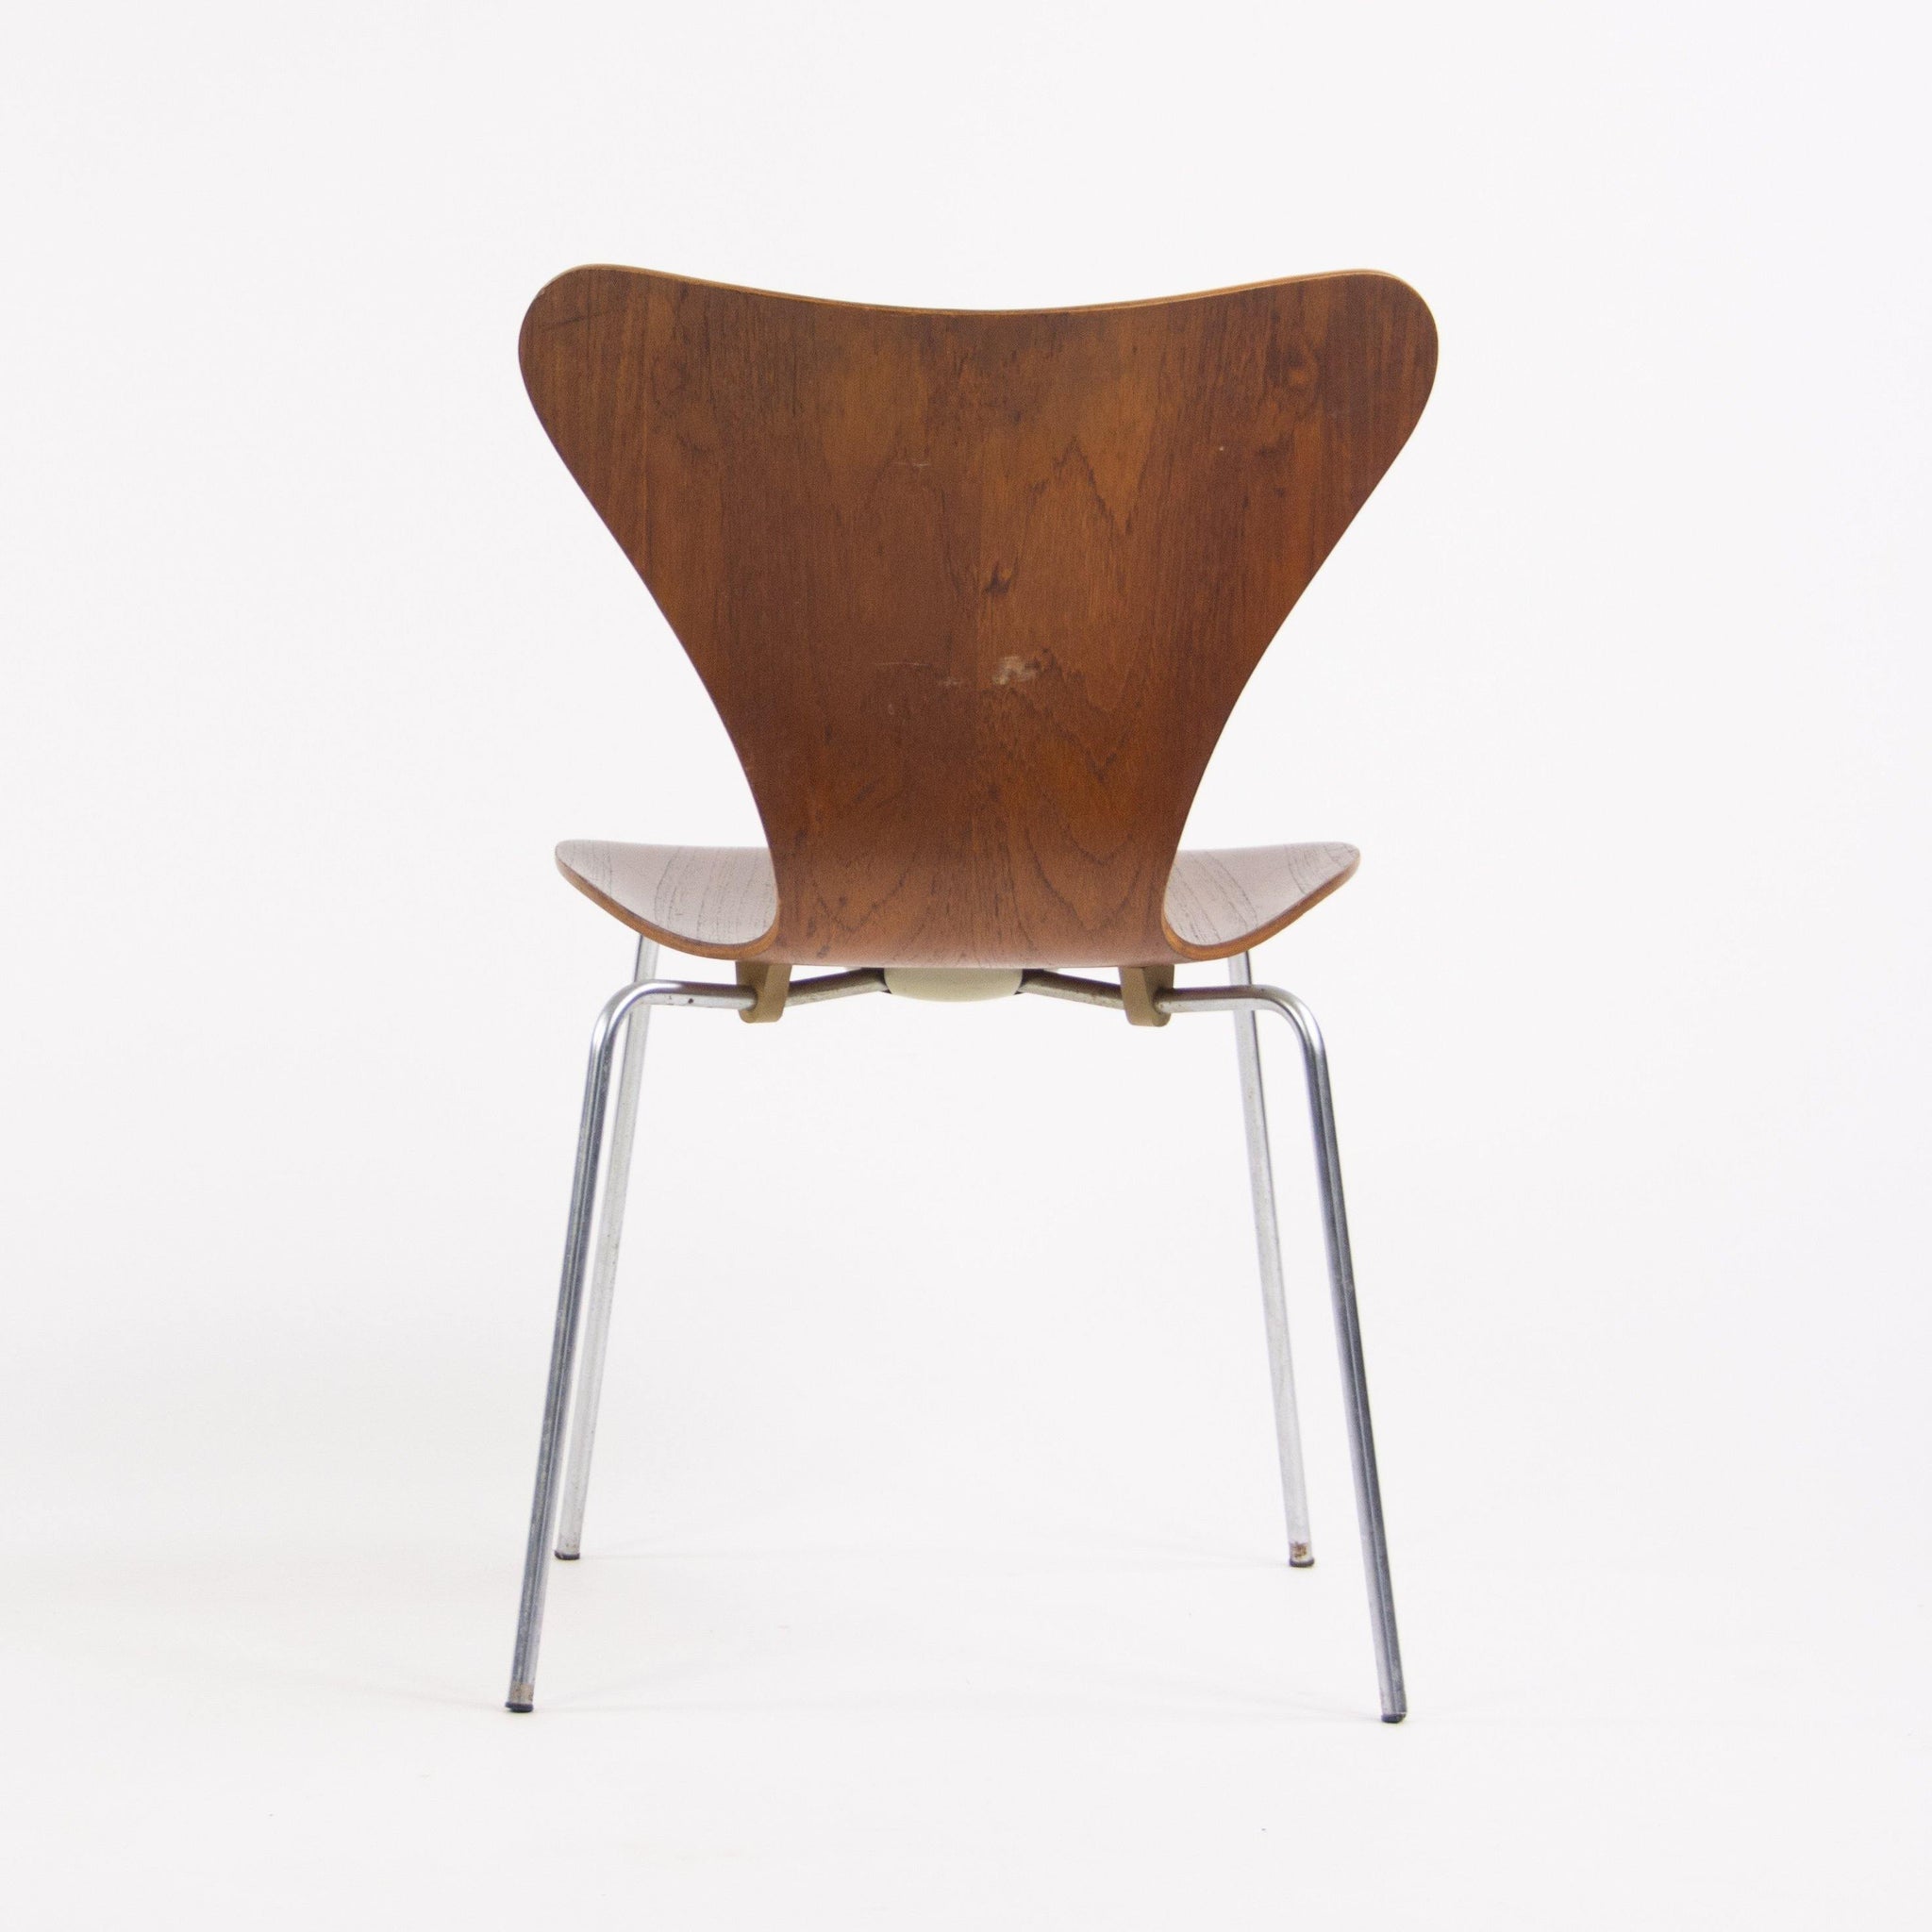 1955_Serie 7 swing by Arne Jacobsen for Louis Vuitton